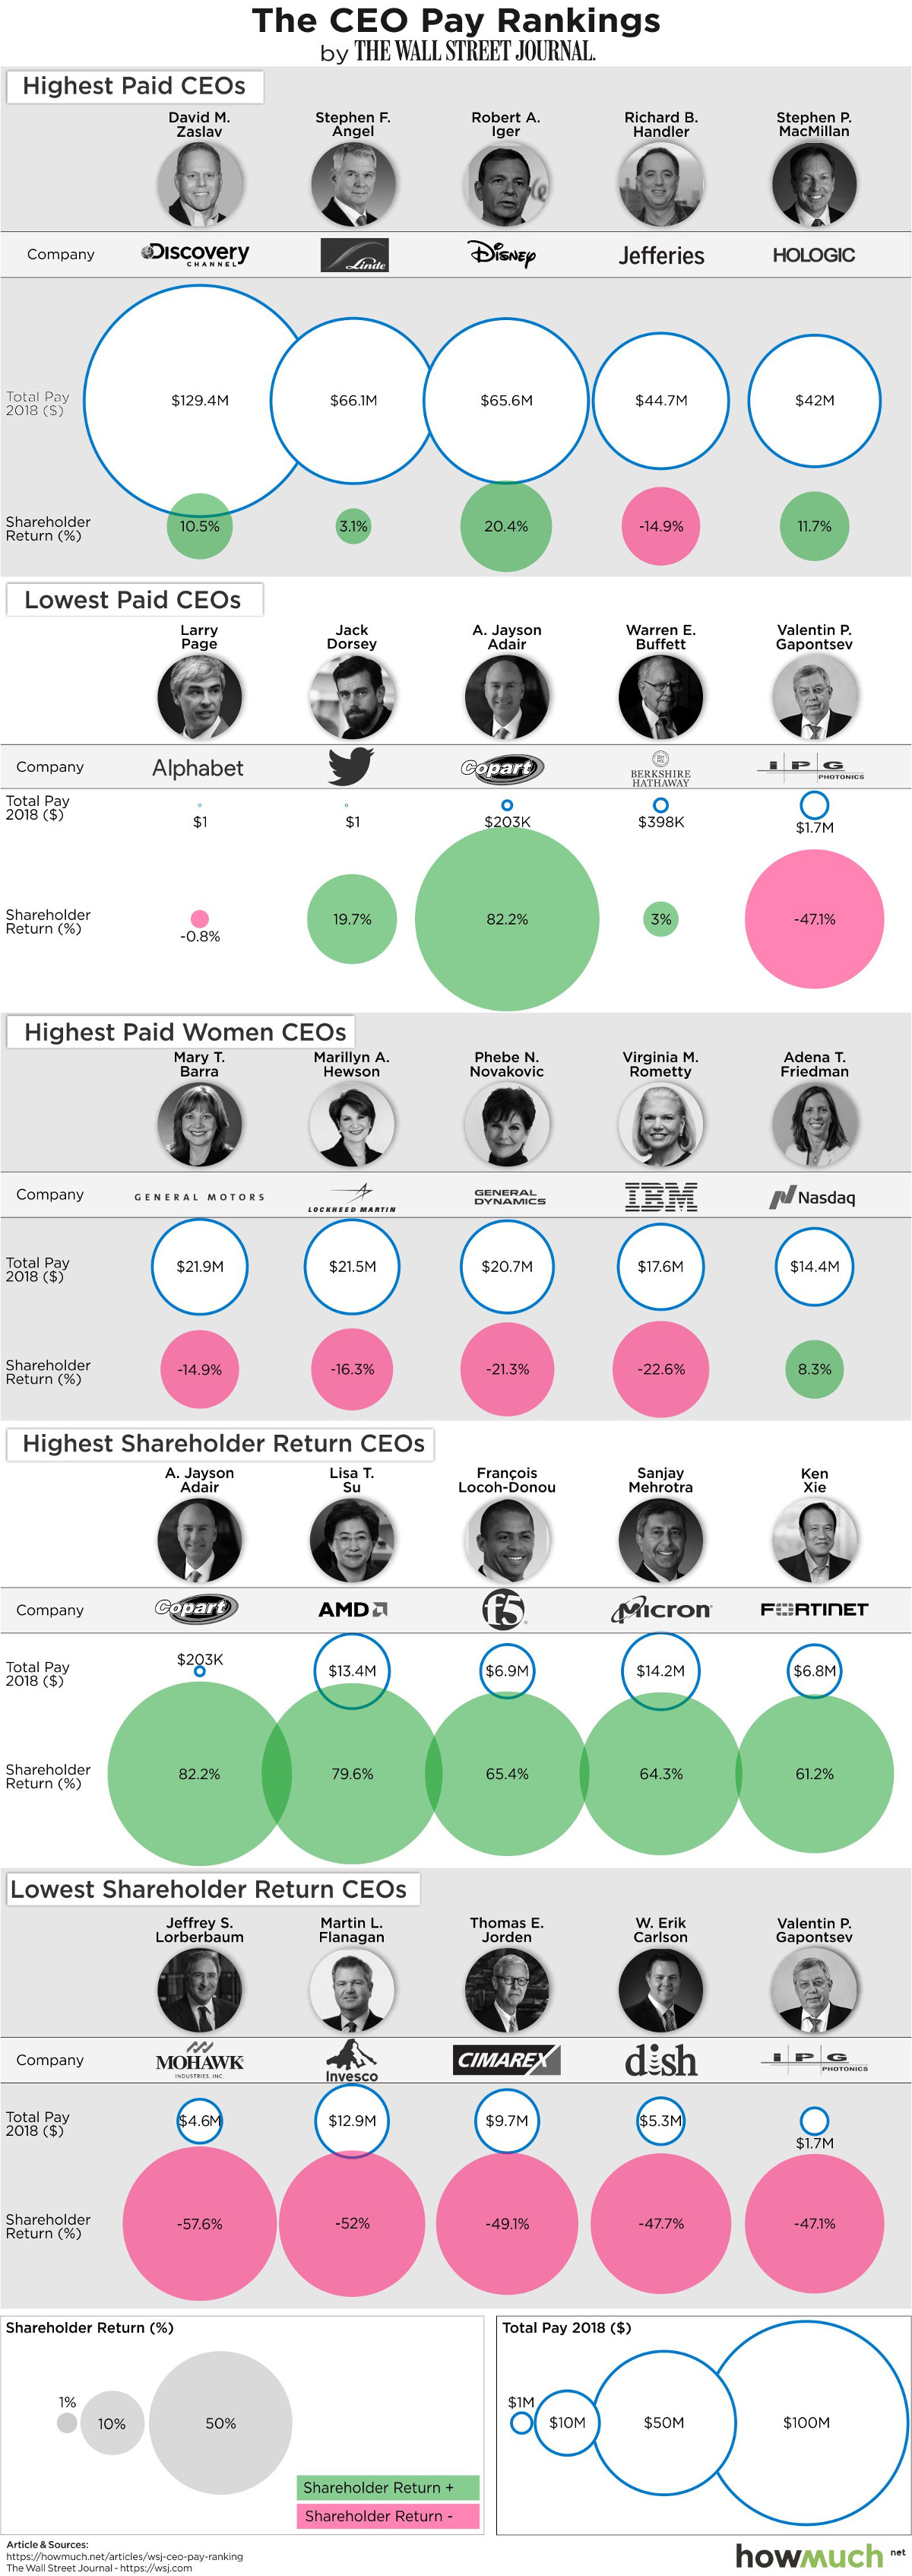 Here's How Much Top CEOs of S&P 500 Companies Get Paid